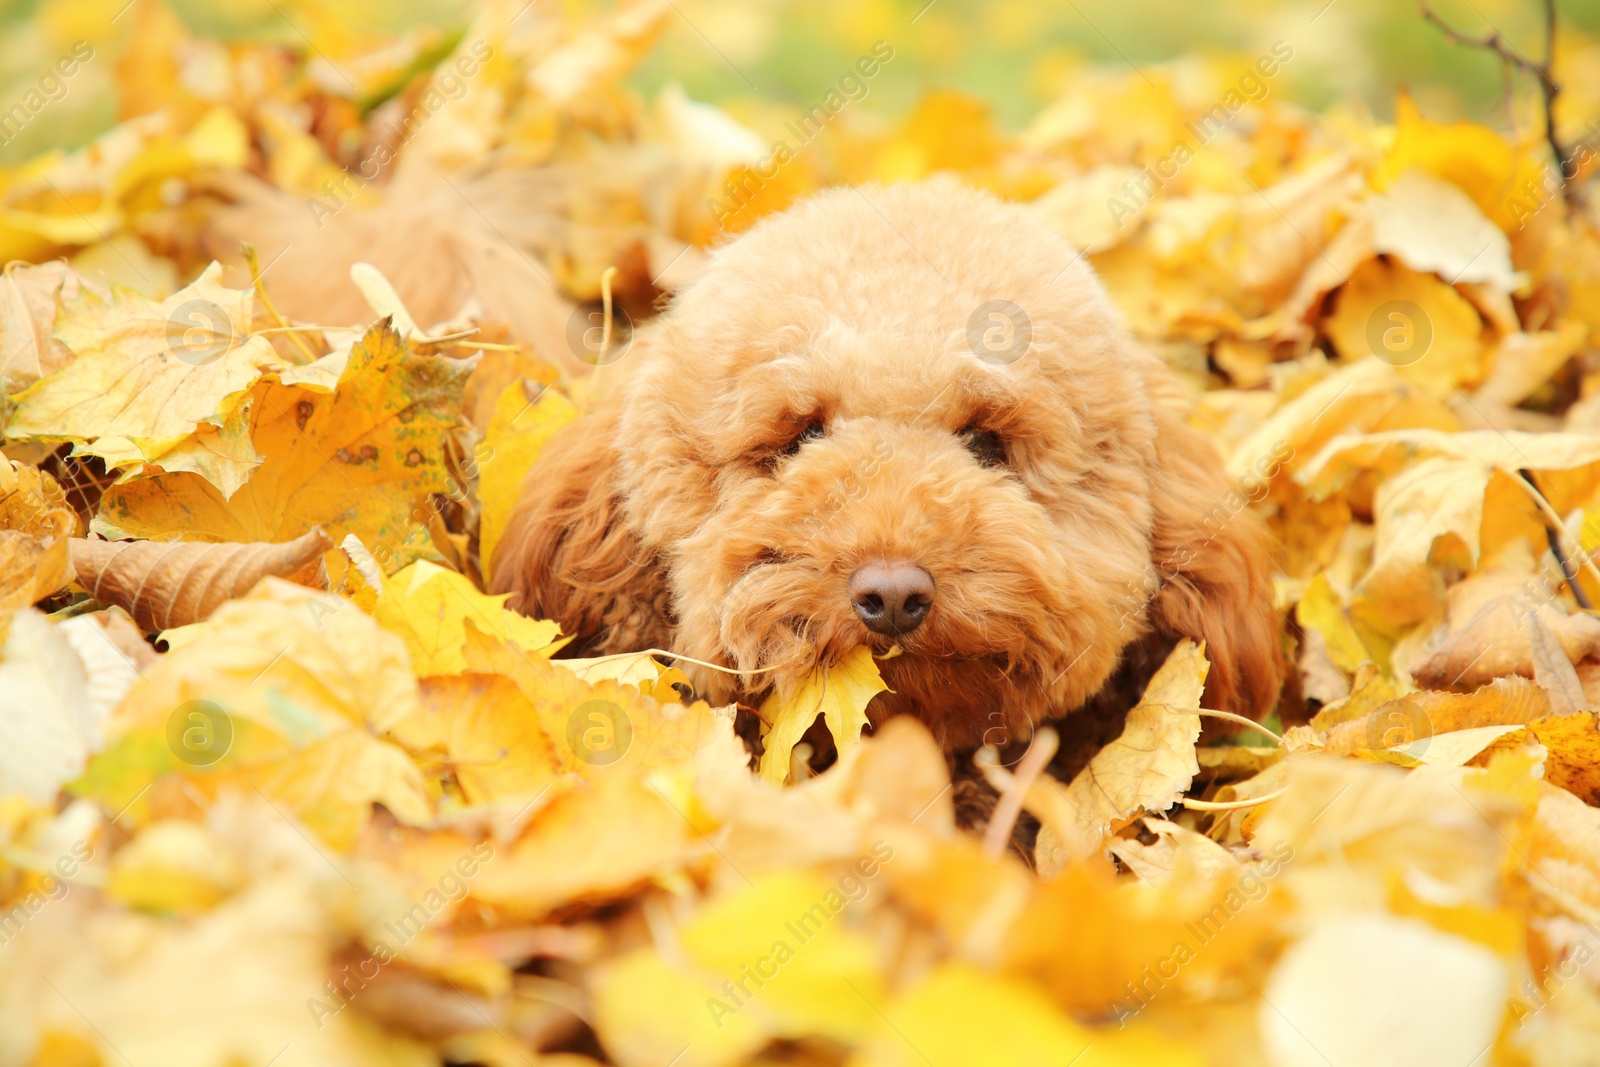 Photo of Cute dog in autumn dry leaves outdoors